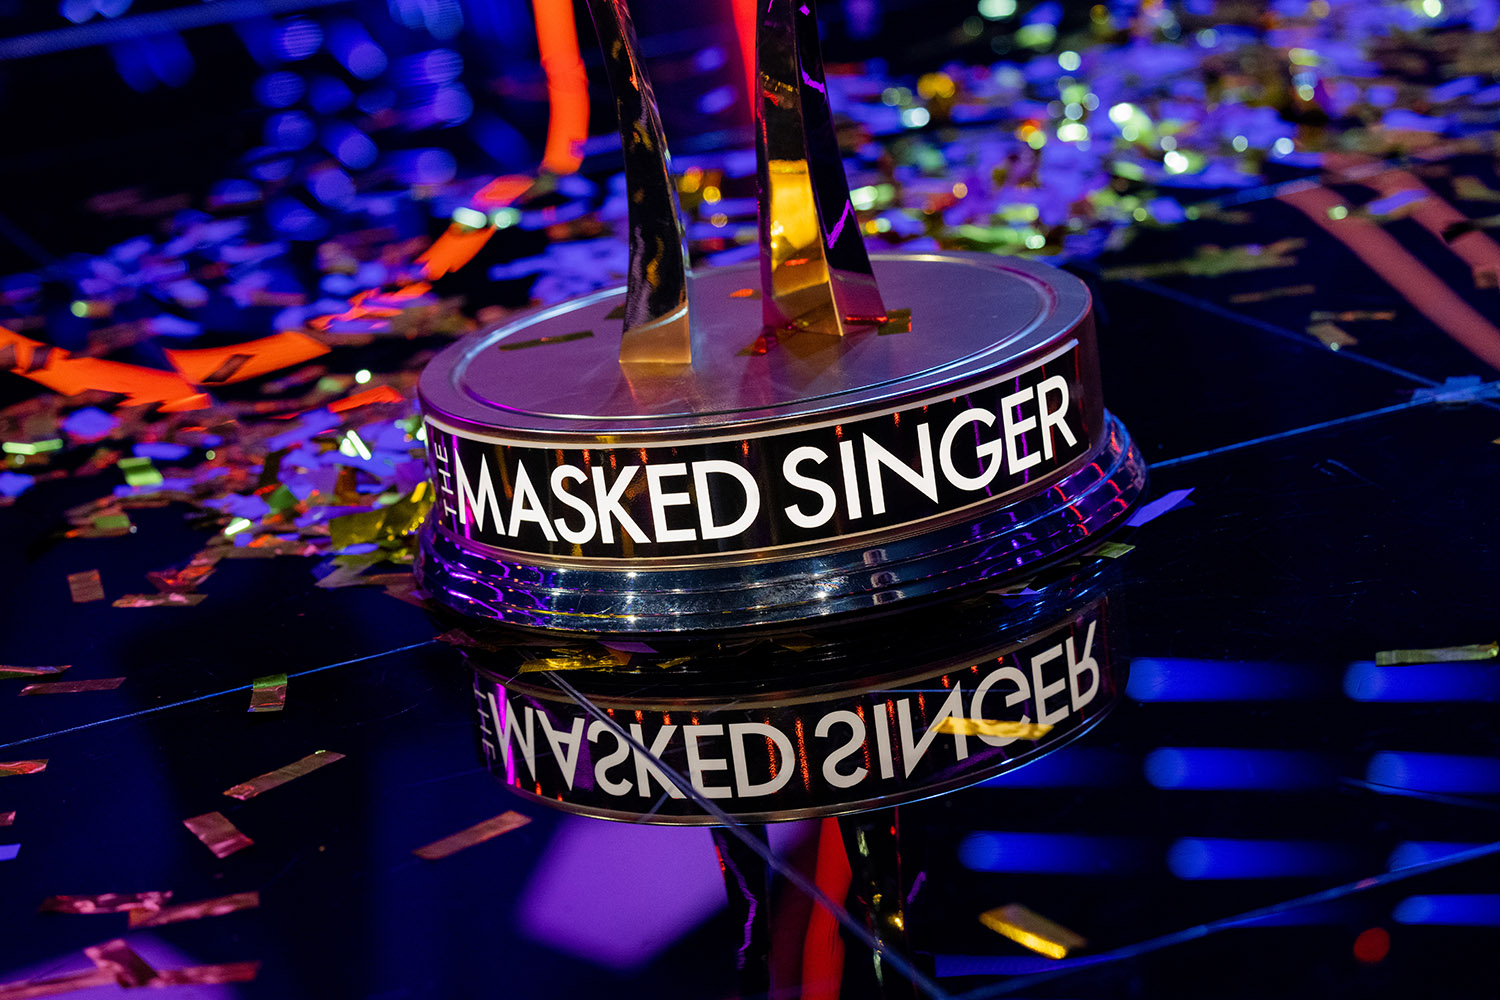 The Masked Singer Season 8 date: a photo of the trophy at the end of season 7